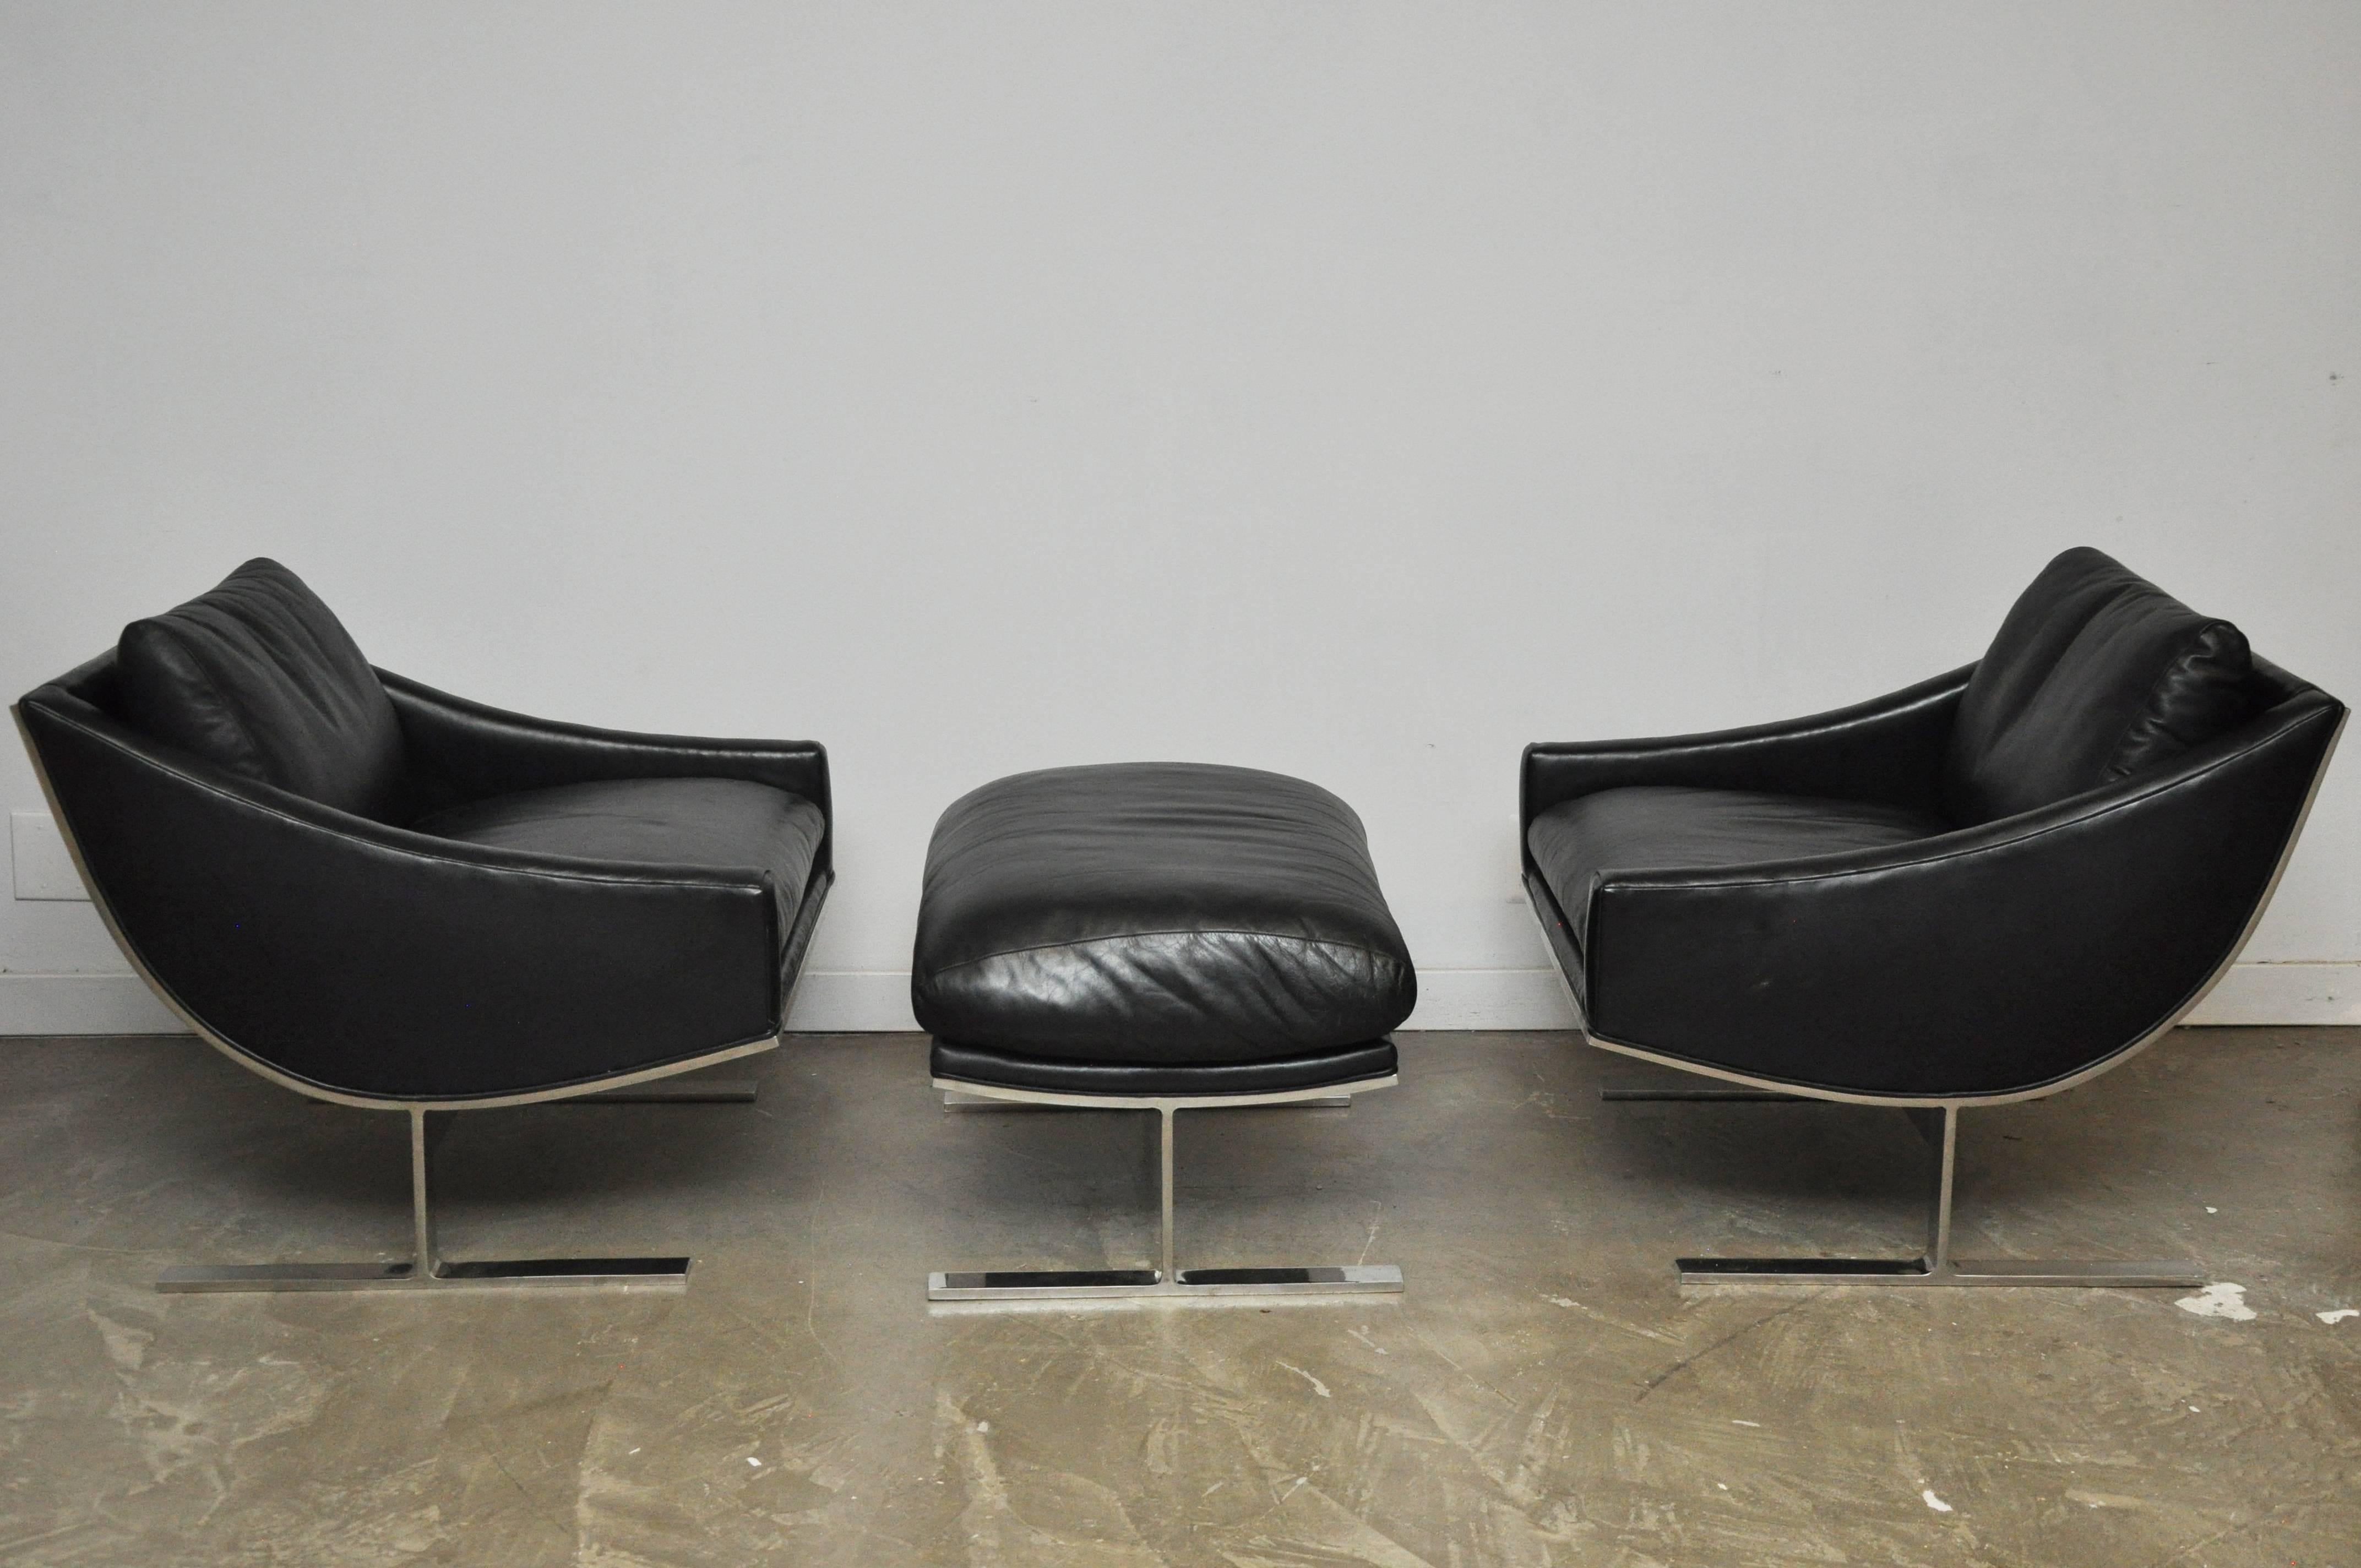 Rare pair of Arc lounge chairs with one shared ottoman. Polished stainless steel with original black leather.